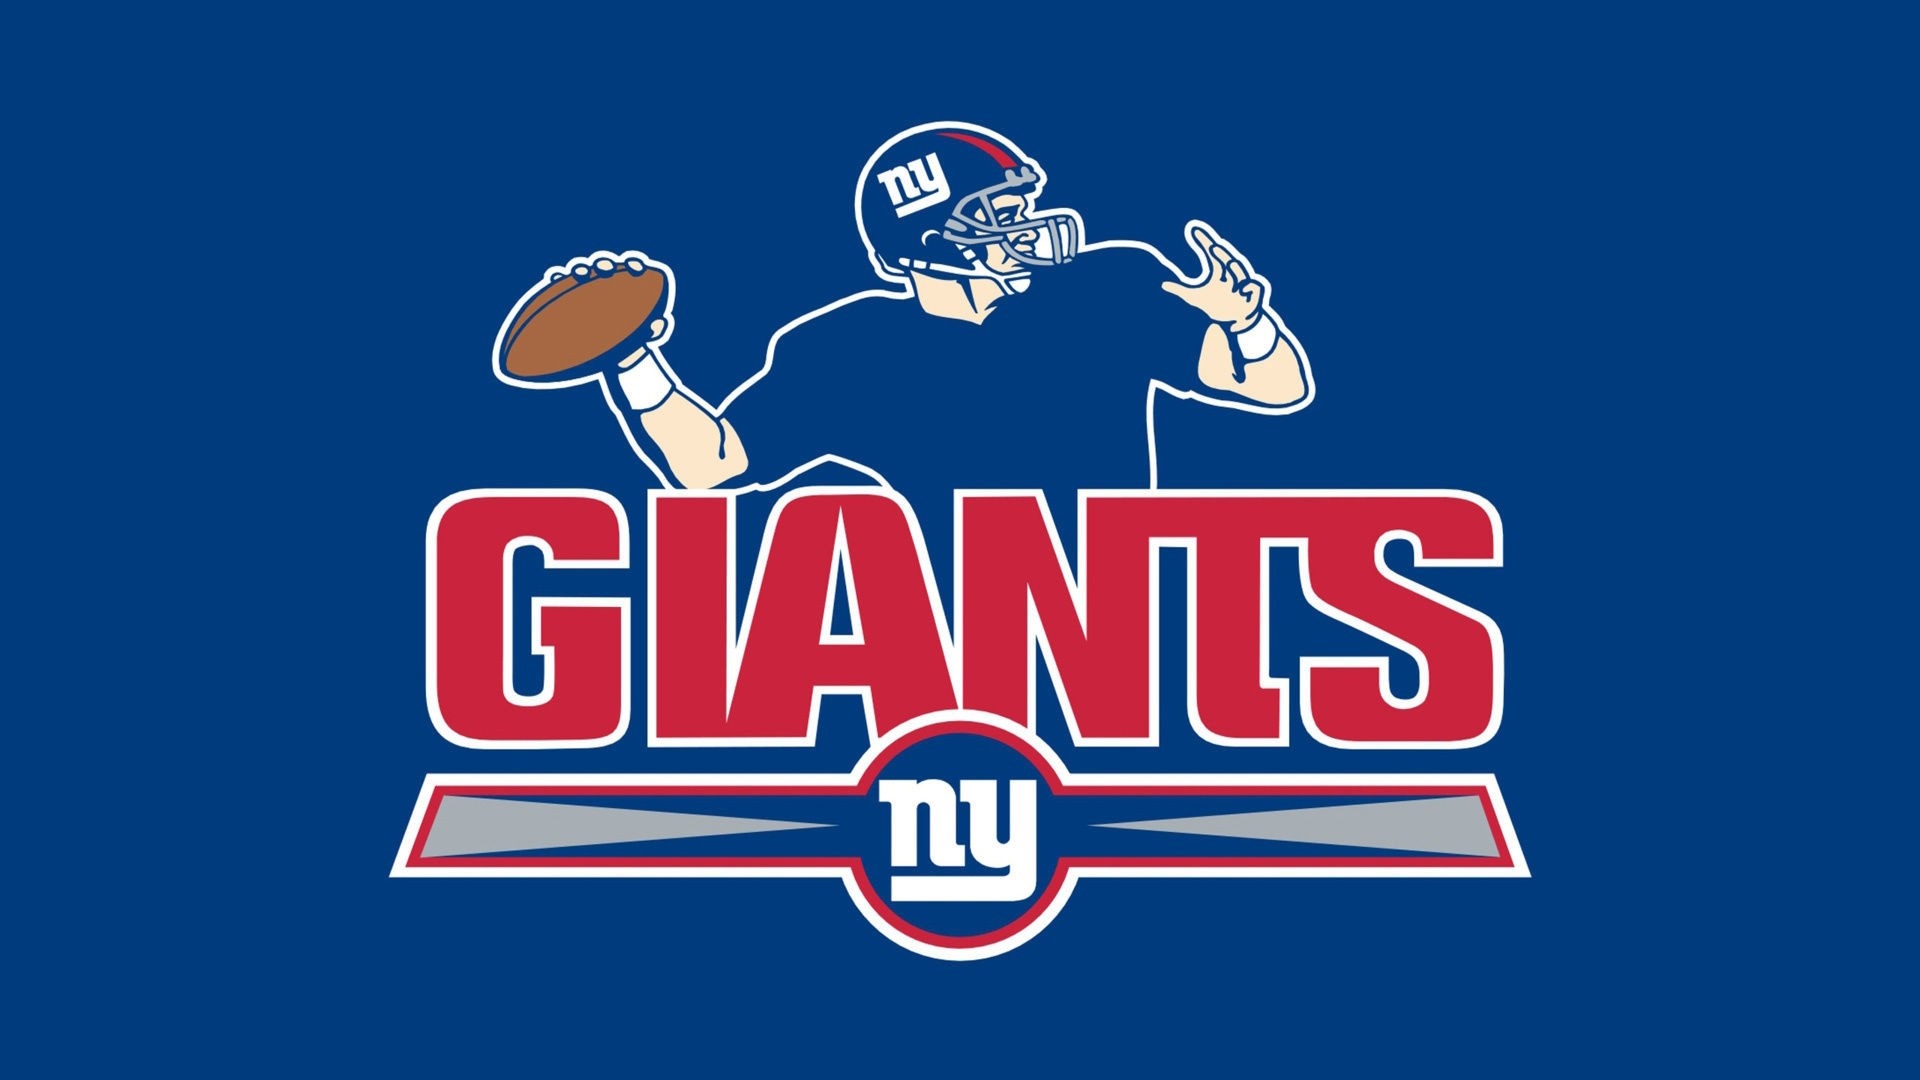 New York Giants Wallpaper For Mac Backgrounds with high-resolution 1920x1080 pixel. You can use this wallpaper for your Mac or Windows Desktop Background, iPhone, Android or Tablet and another Smartphone device